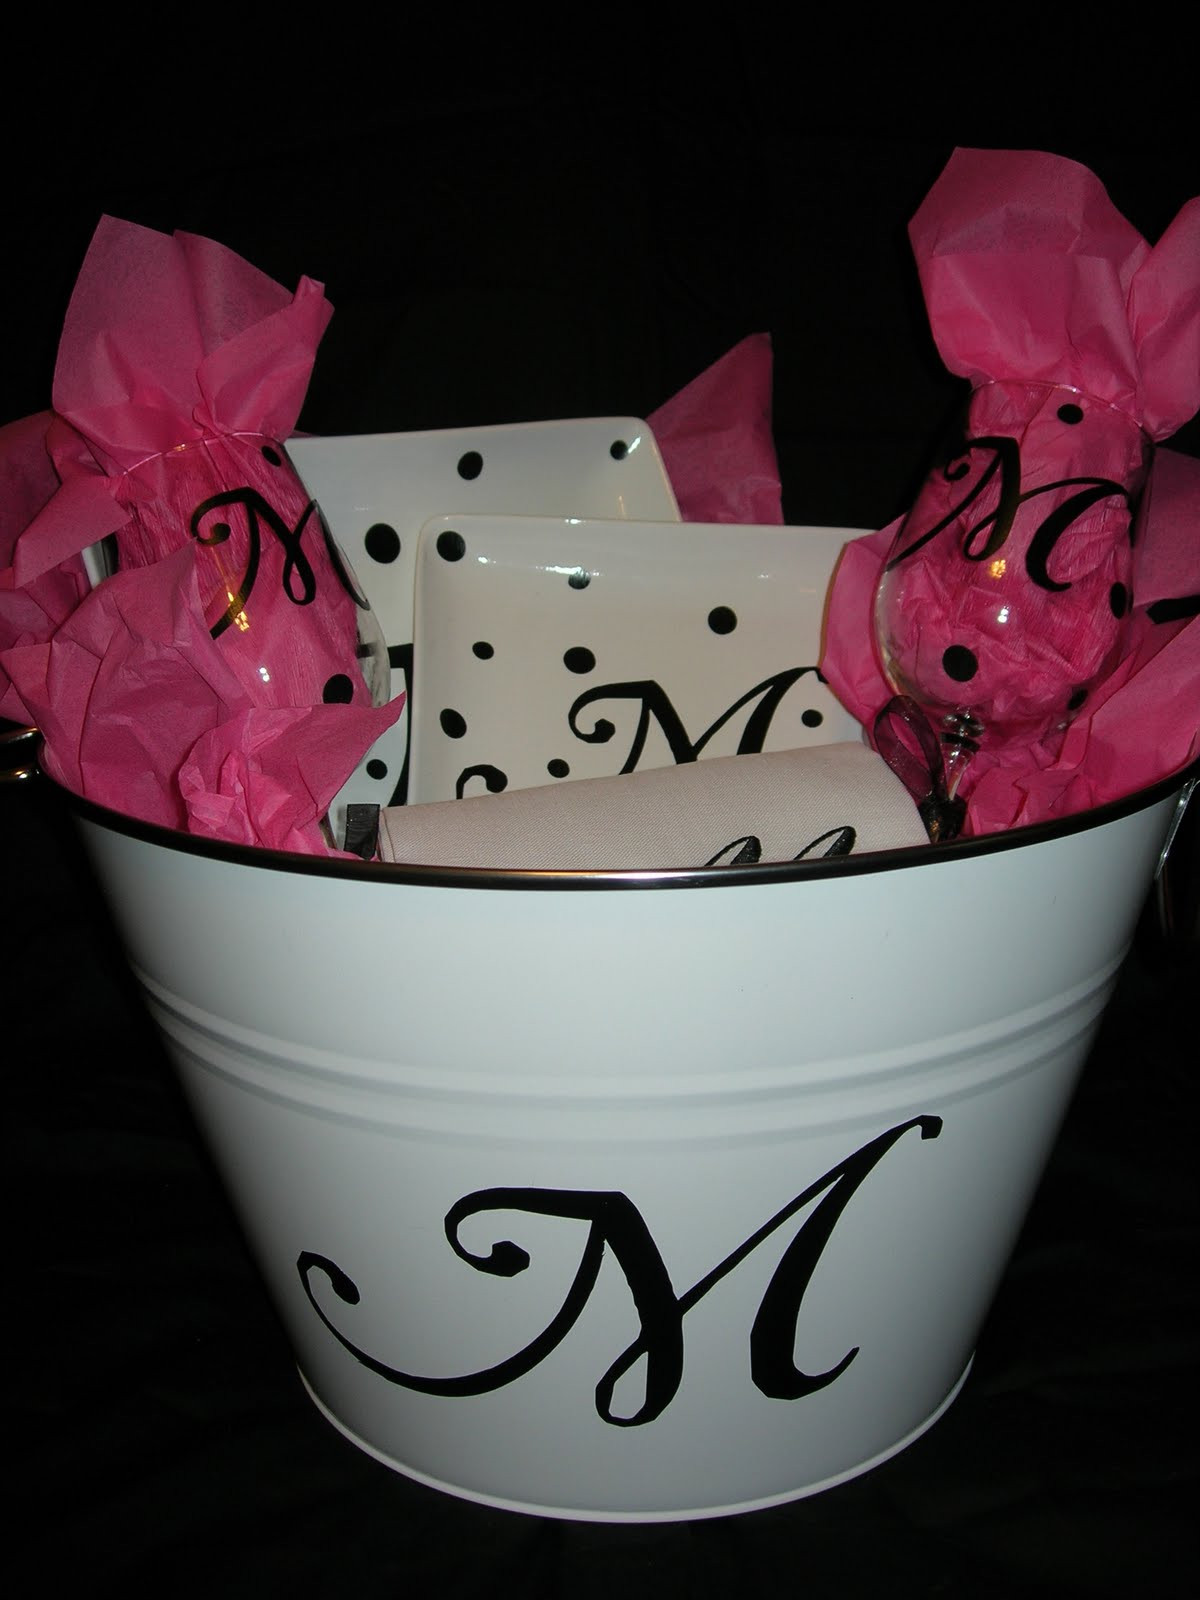 Bridal Shower And Wedding Gift
 Bliss Events by Rachel Cricut Creations Bridal Shower Gift